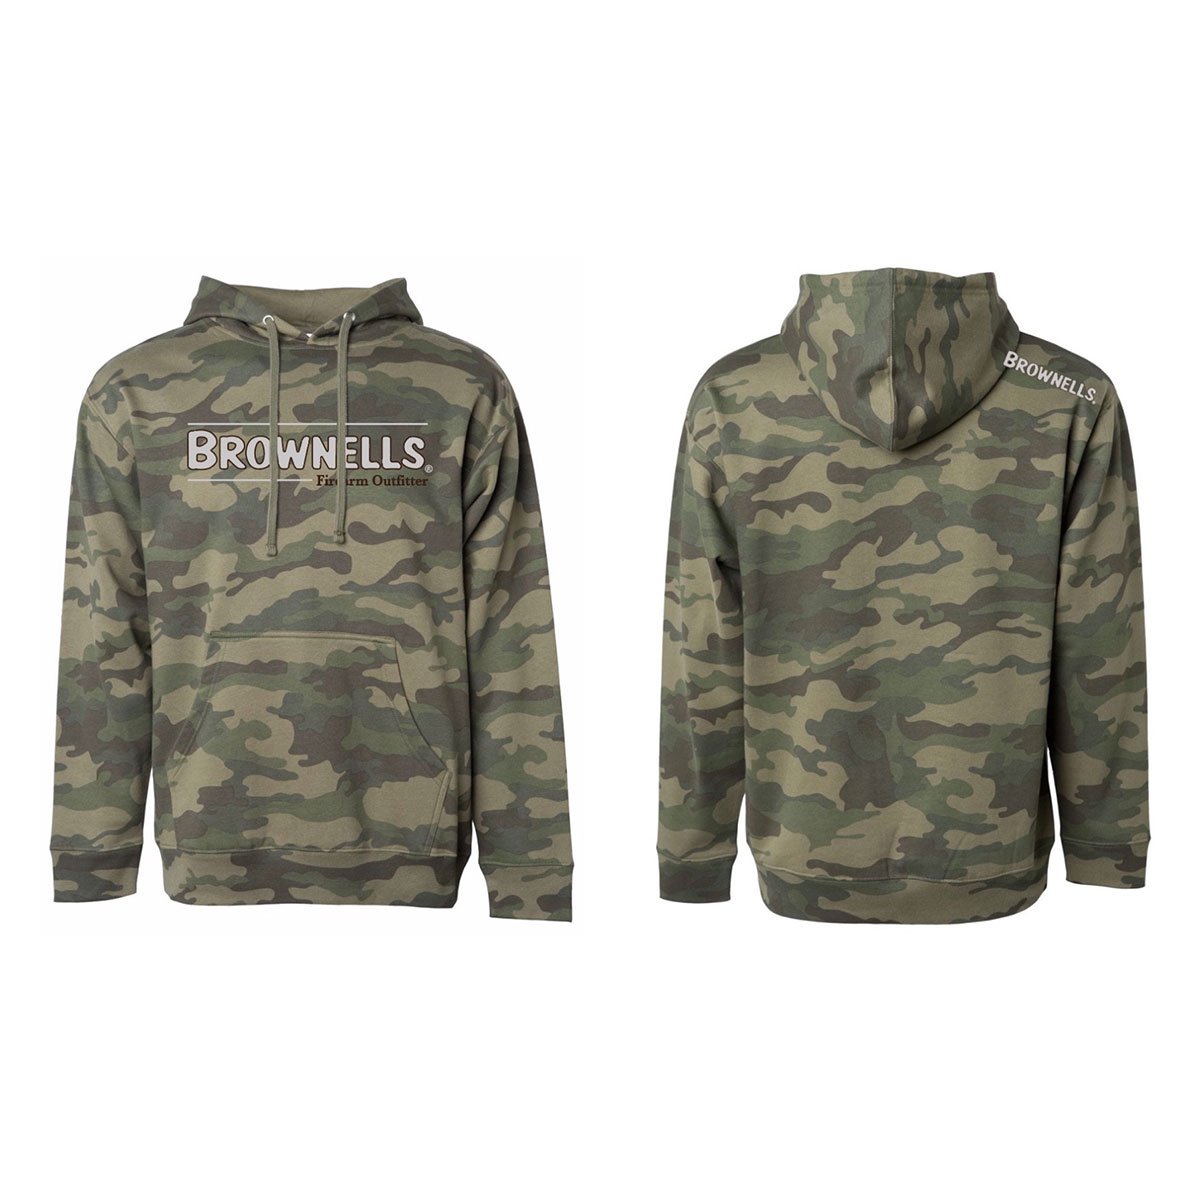 BROWNELLS - MEN'S OUTFITTER HOODIE CAMO